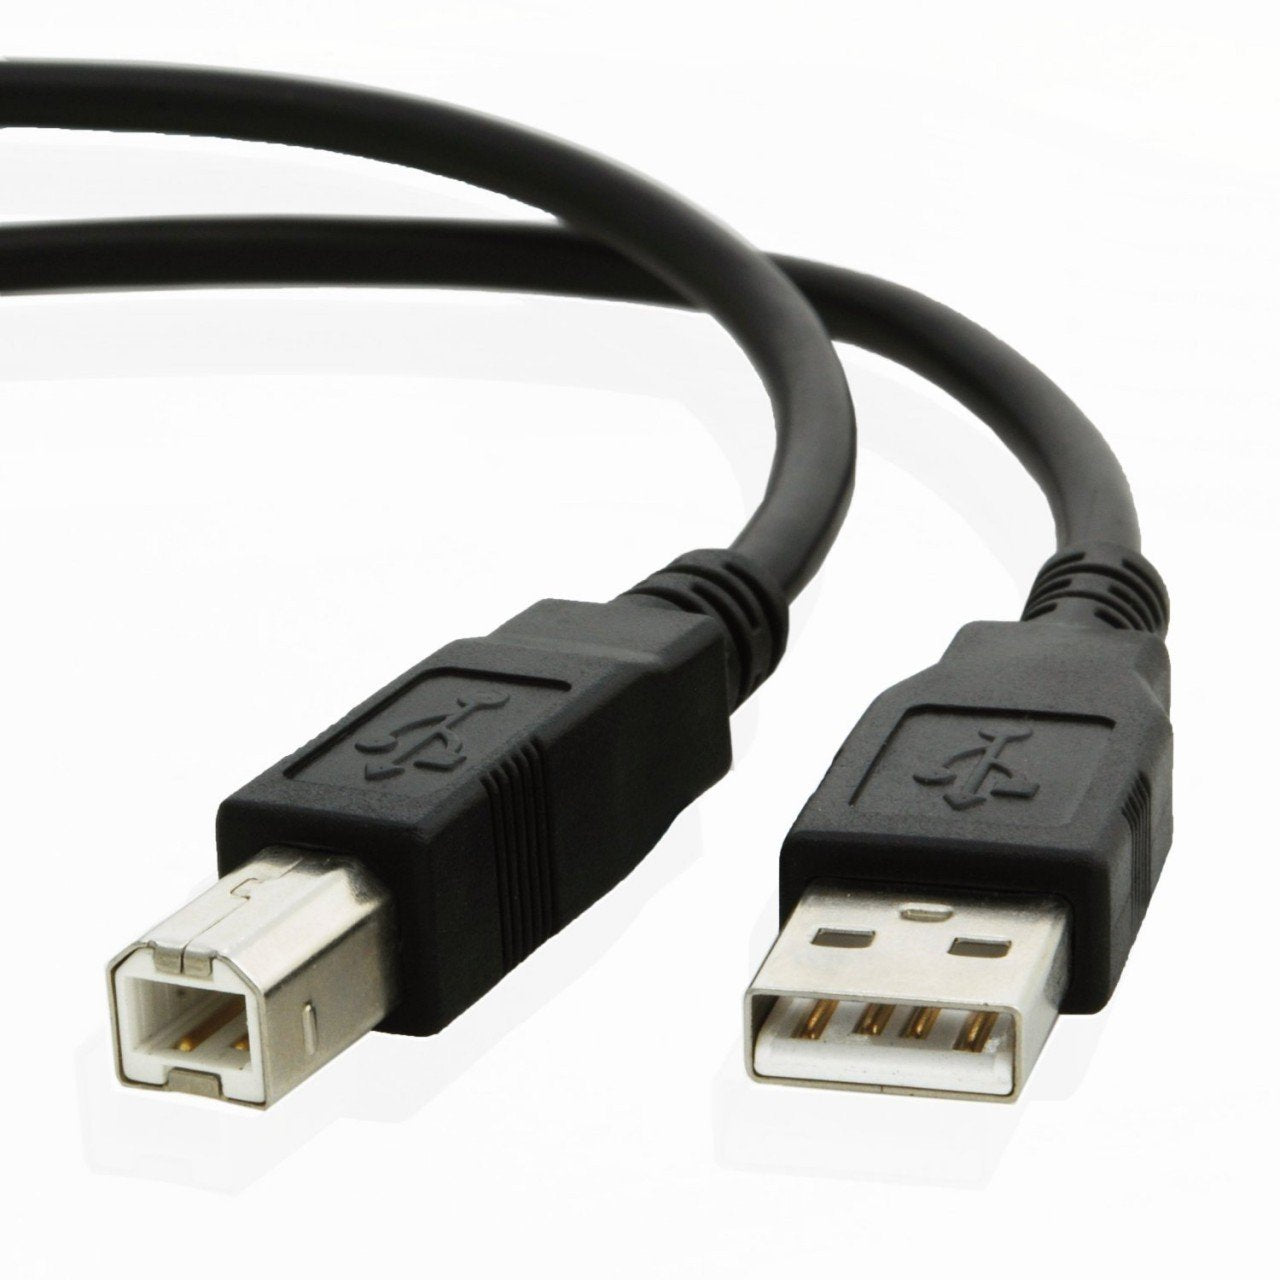 USB cable for Epson EXPRESSION XP-960